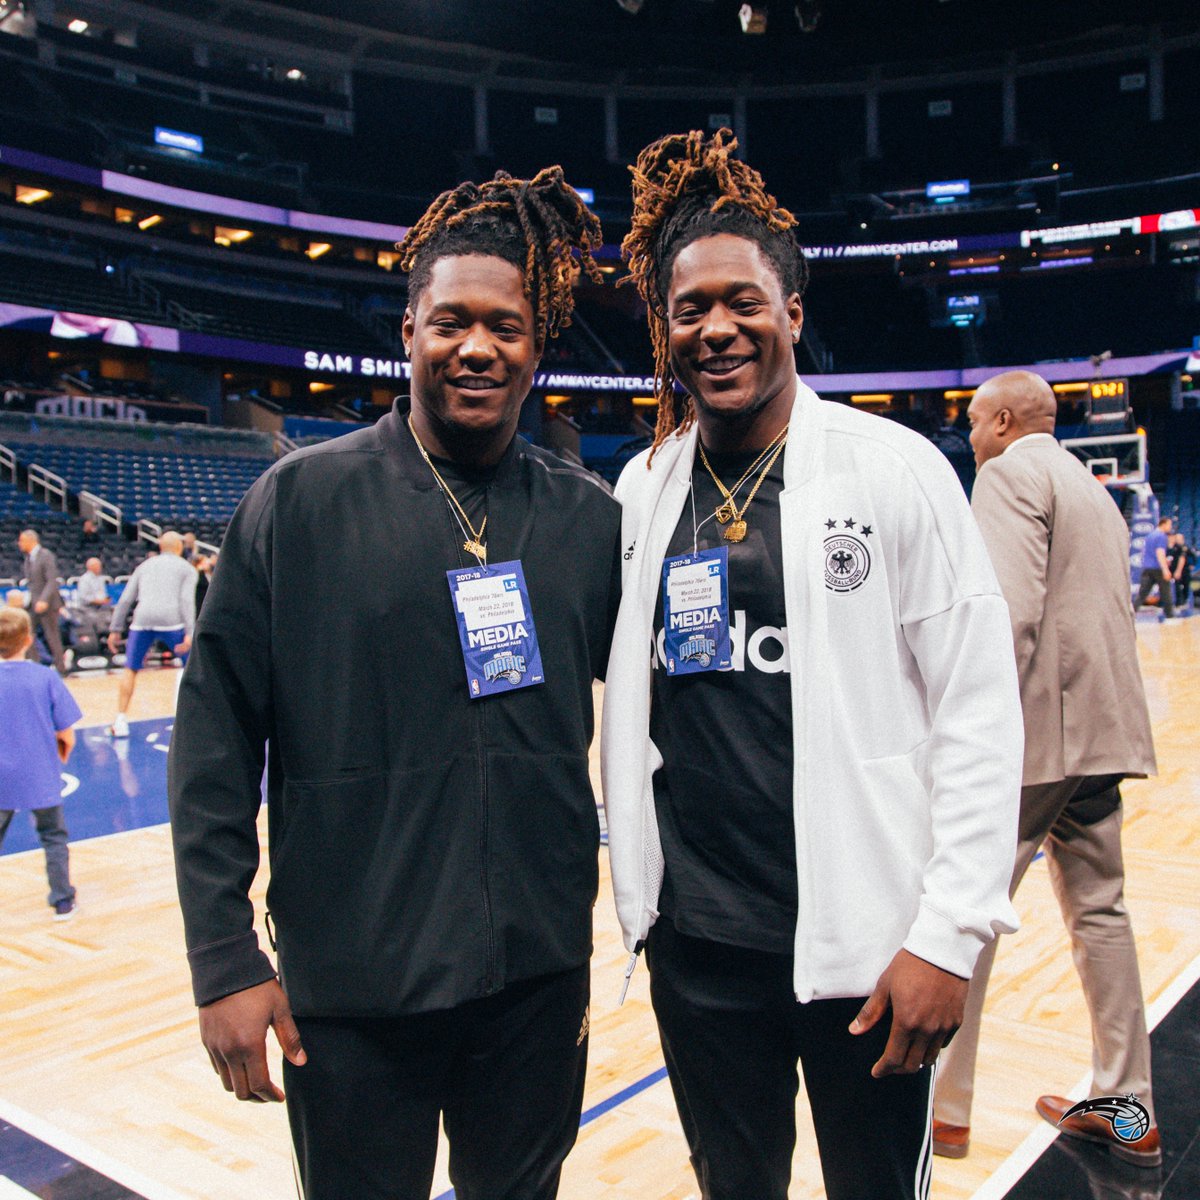 #ChargeOn ⚔️ @Shaquemgriffin and @ShaquillG are in the 🏠! https://t.co/ogzfbv9TLF